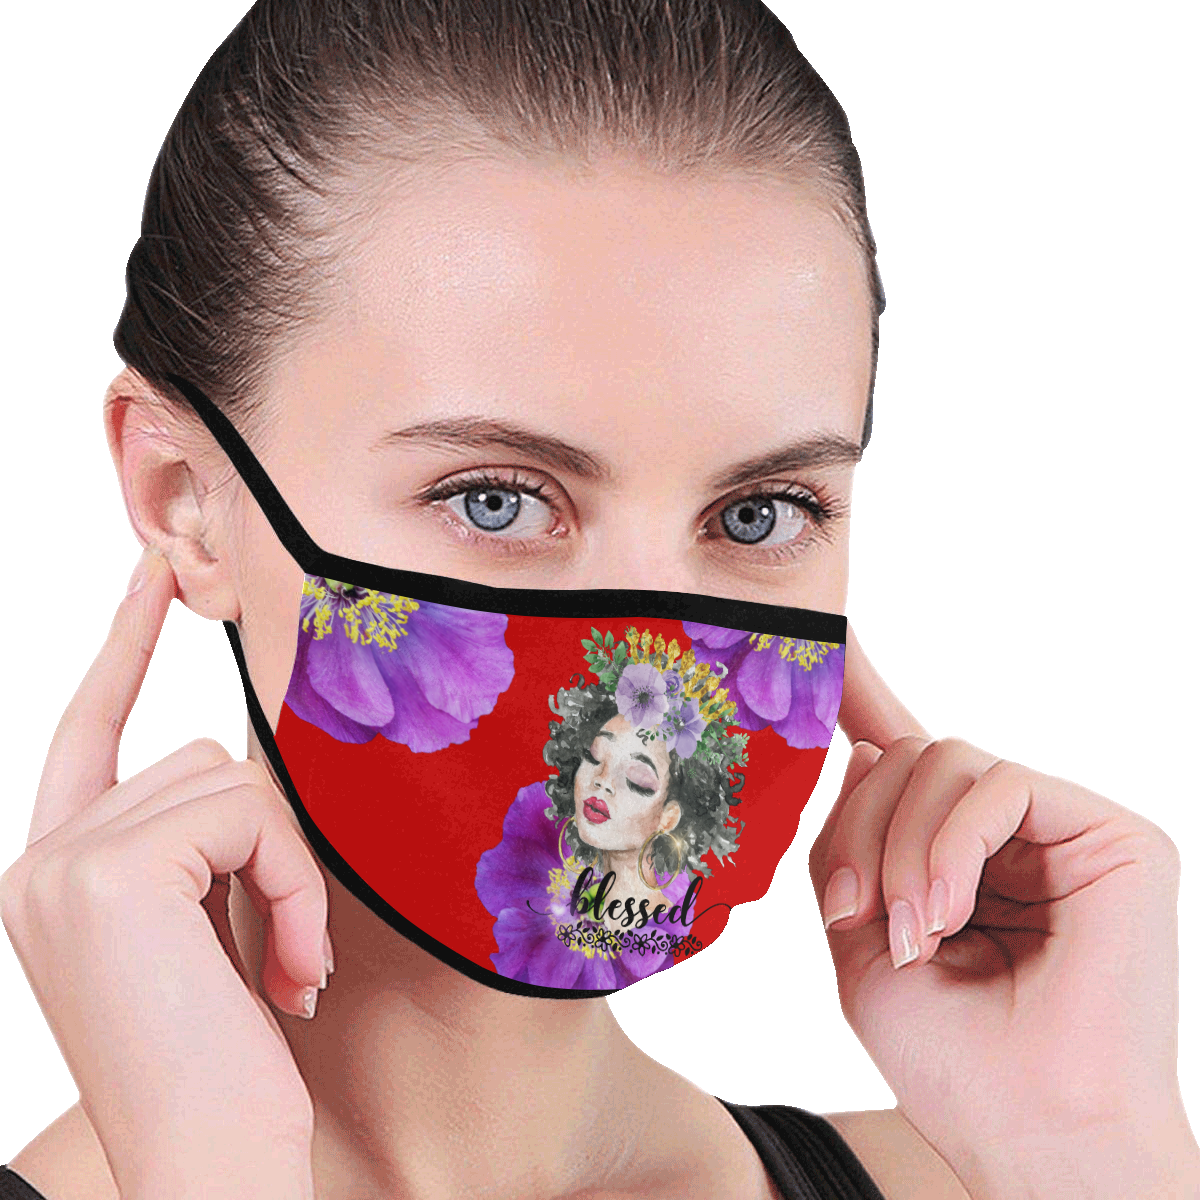 Fairlings Delight's The Word Collection- Blessed 53086a15 Mouth Mask